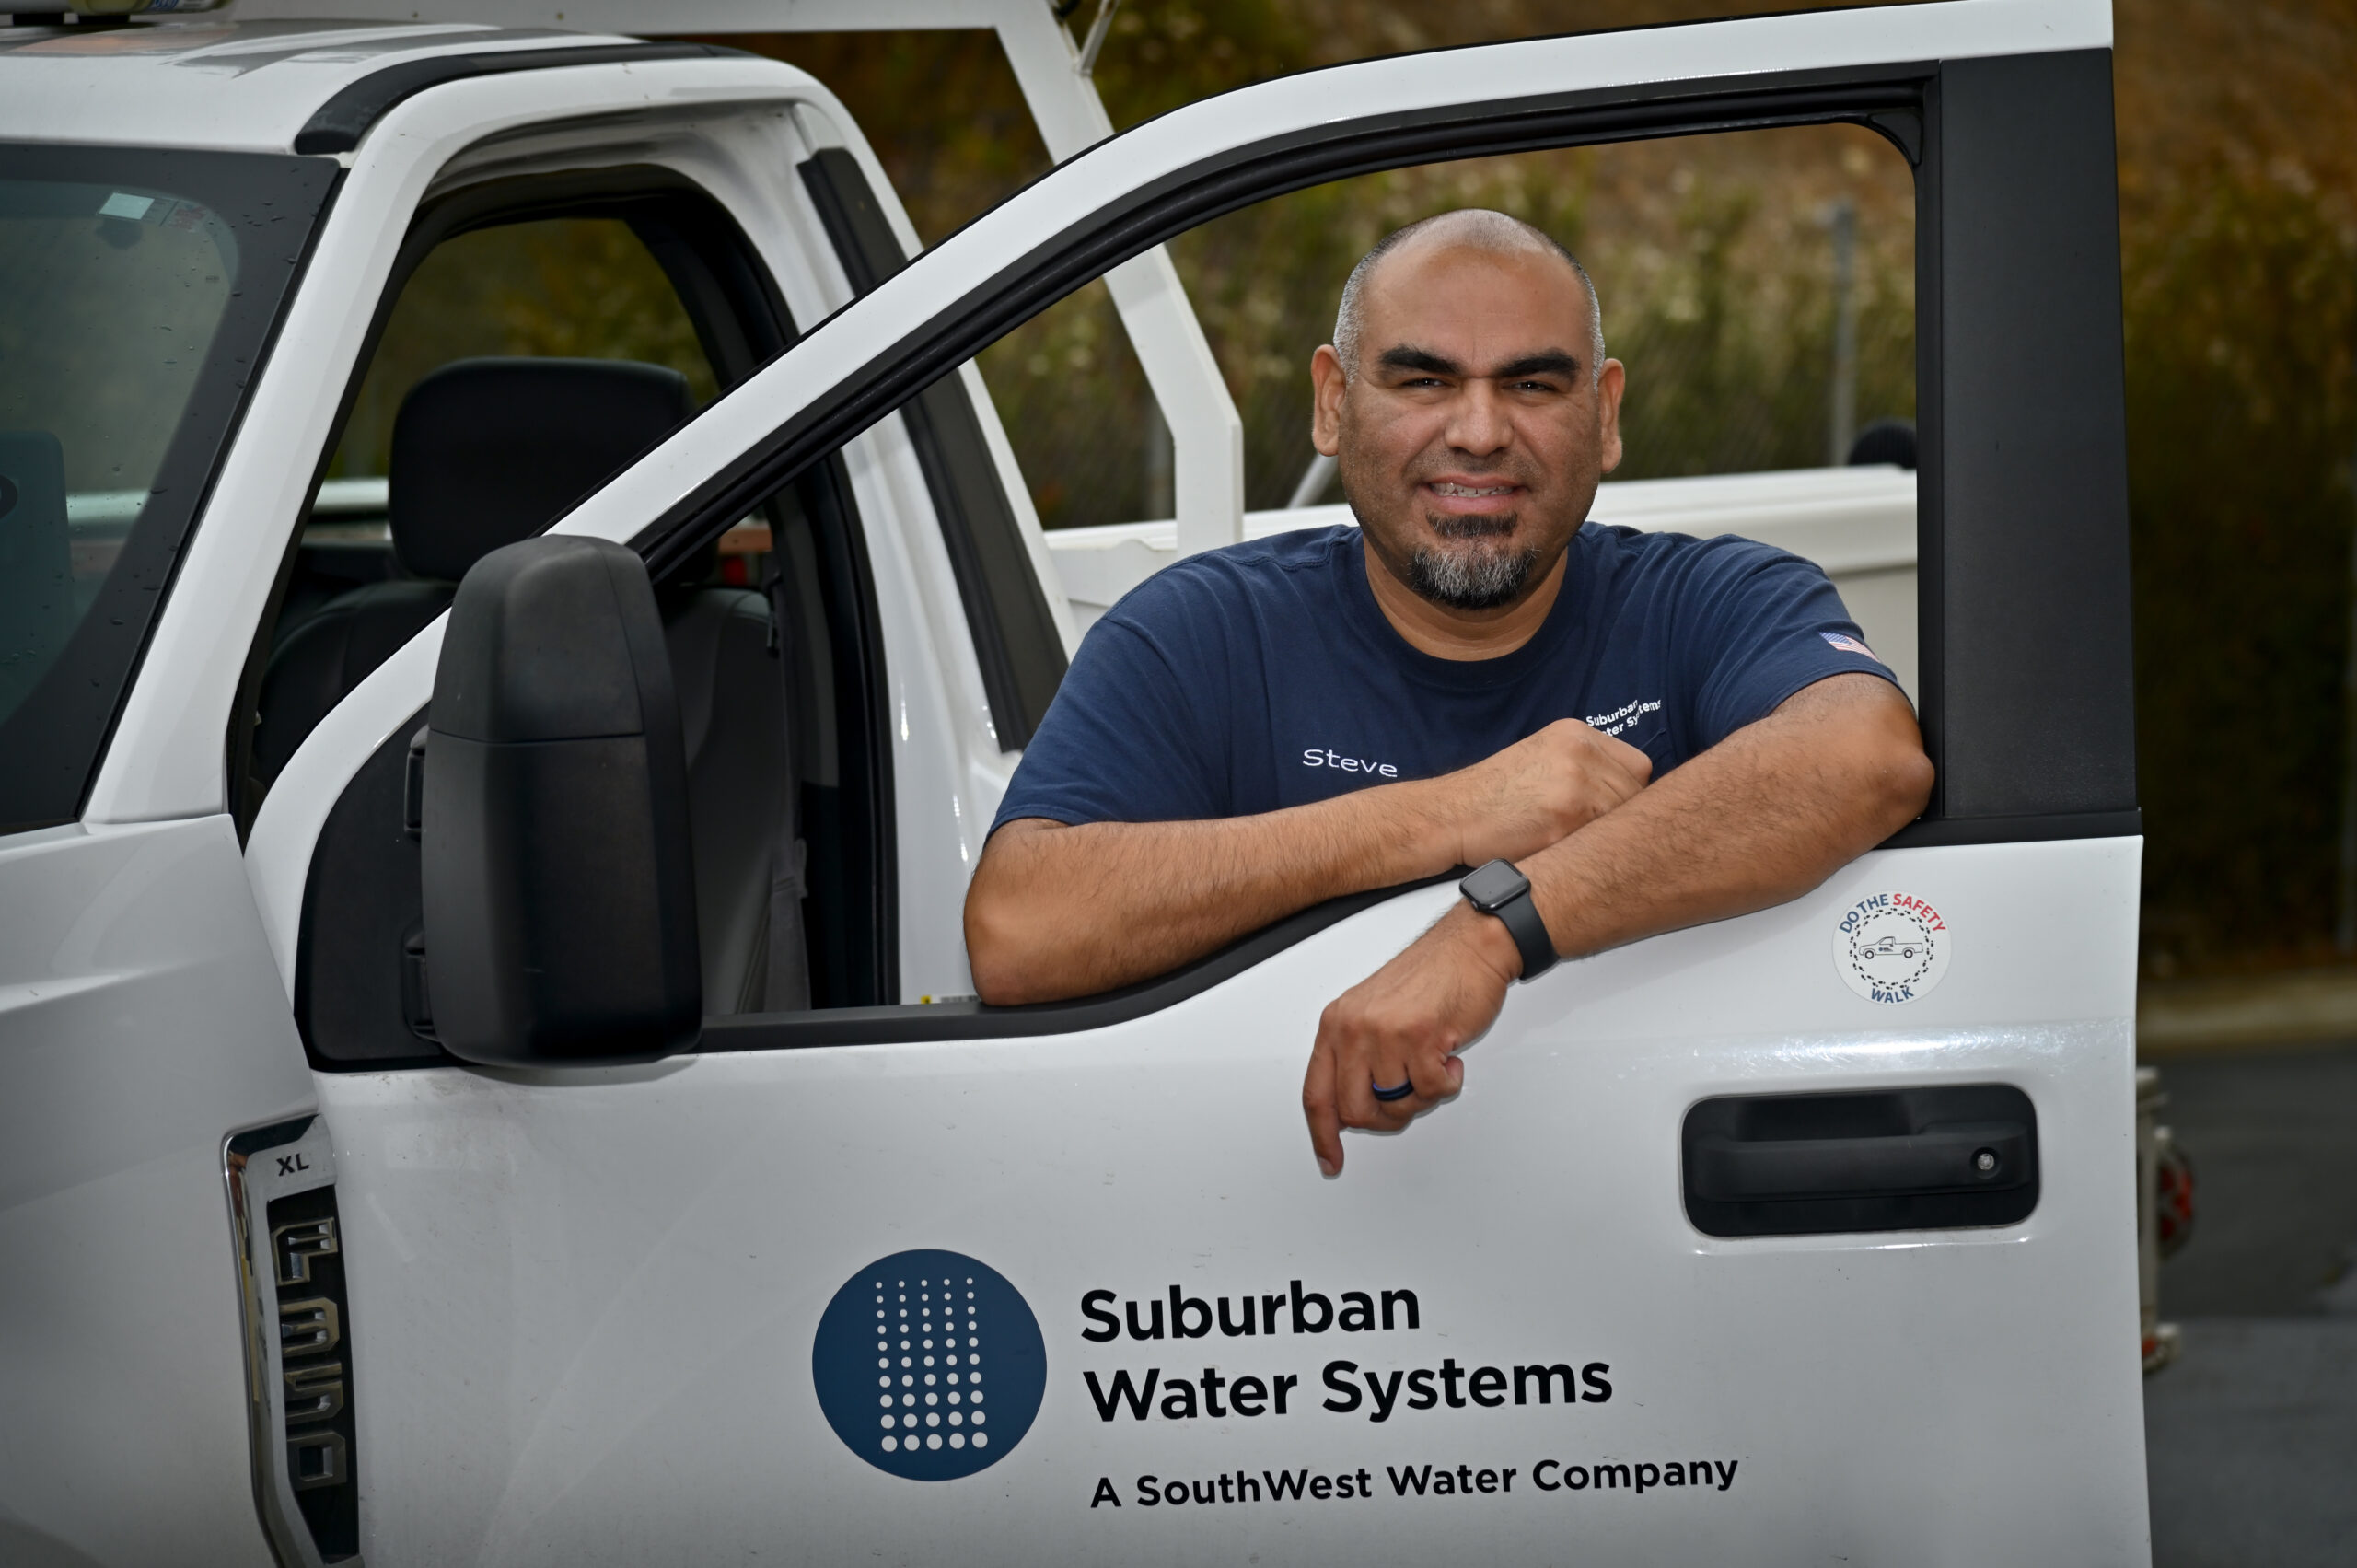 SouthWest Water Company - Suburban Water Systems, About Us Page